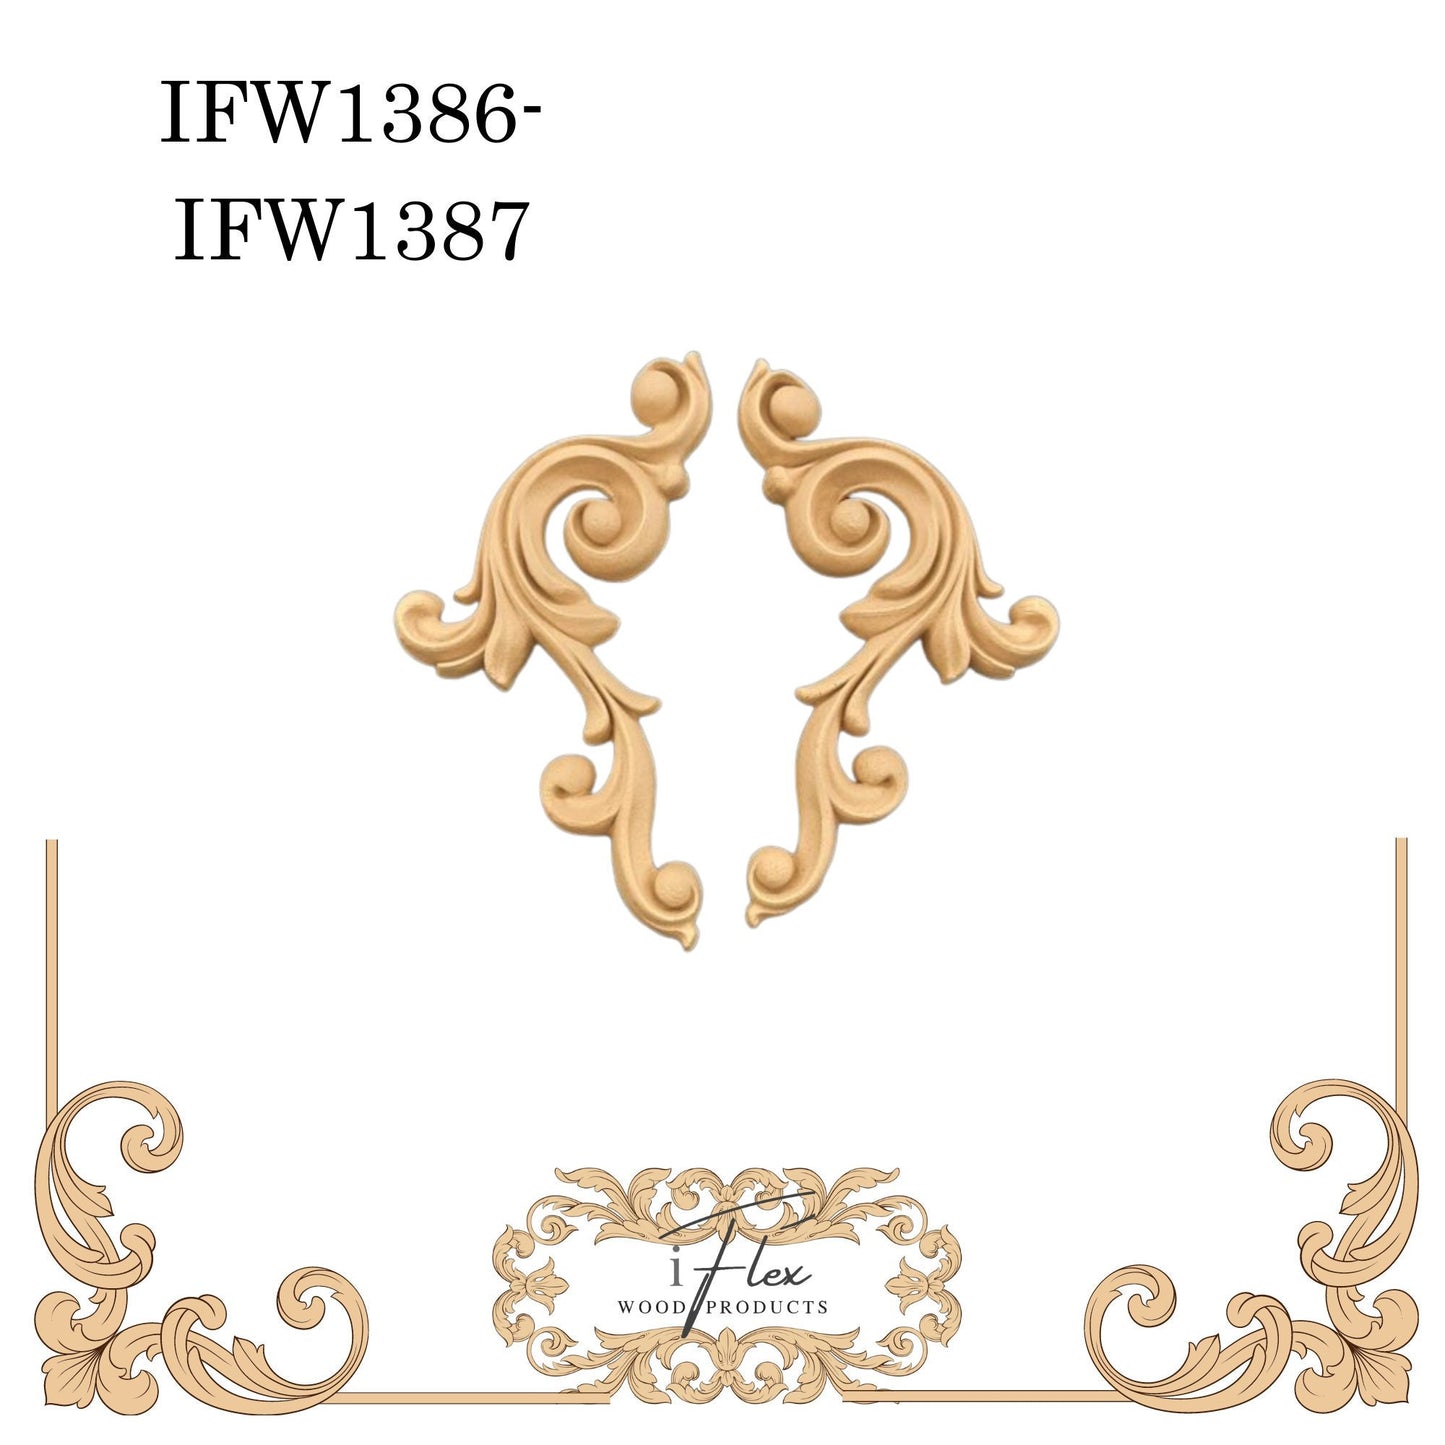 IFW 1386-1387 iFlex Wood Products, bendable mouldings, flexible, wooden appliques, scroll pair